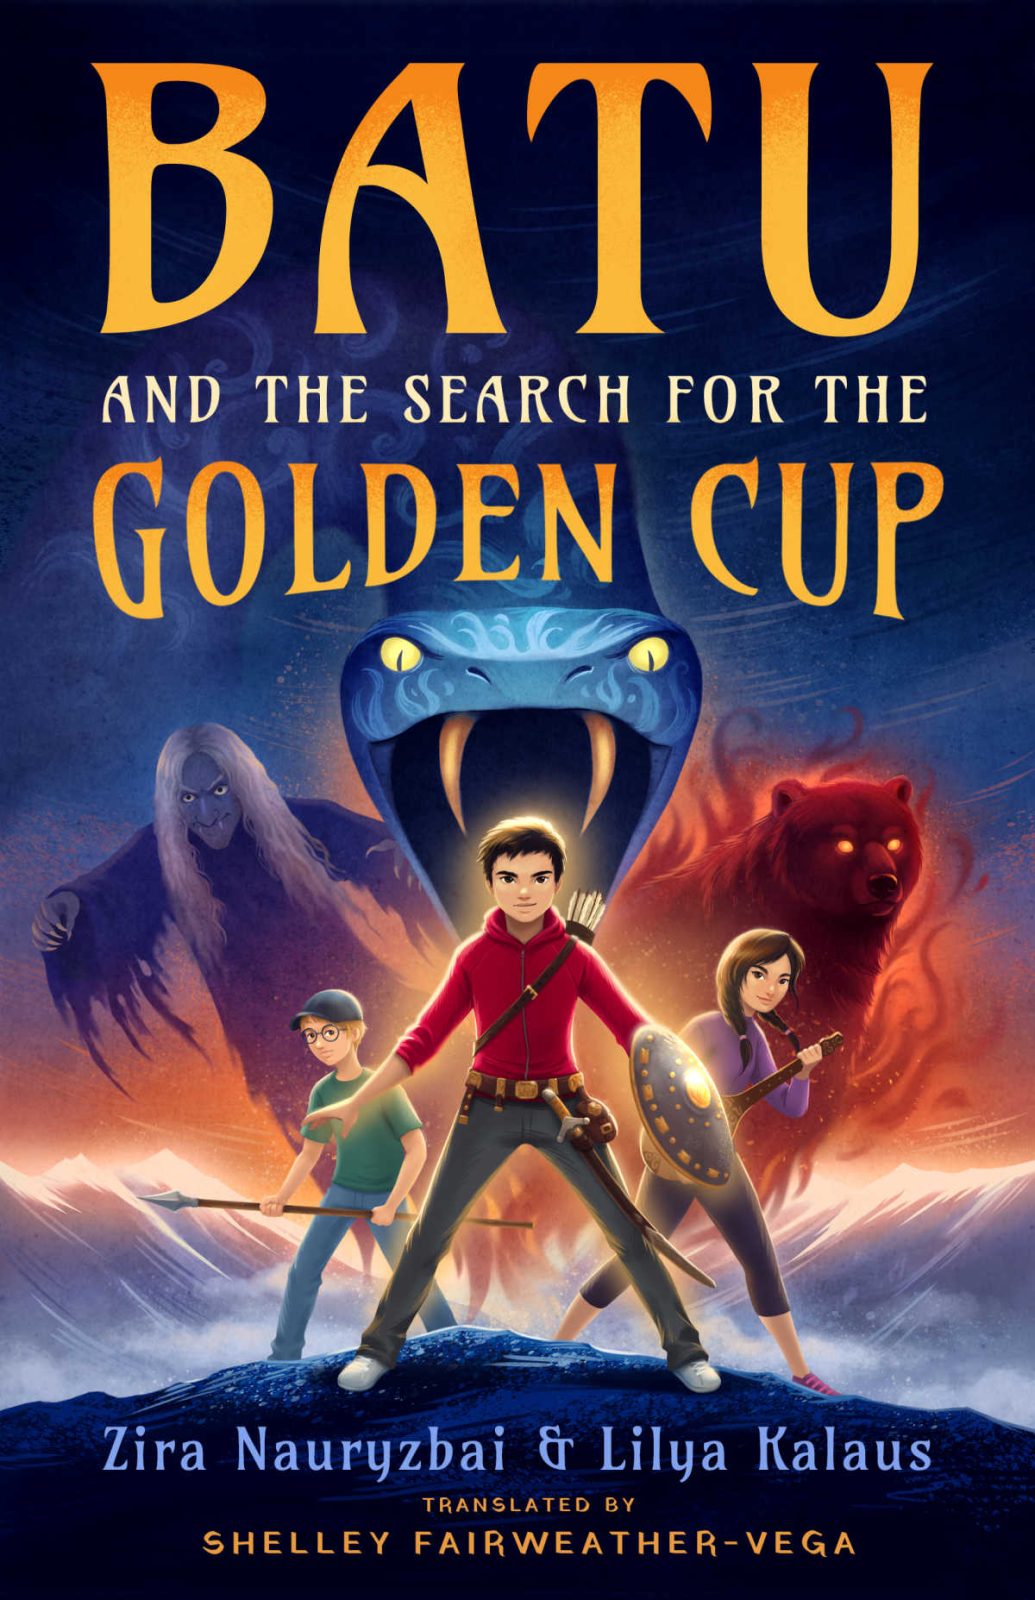 Batu & the Search for the Golden Cup is a unique and exciting blend of fantasy and adventure that kids will enjoy reading.